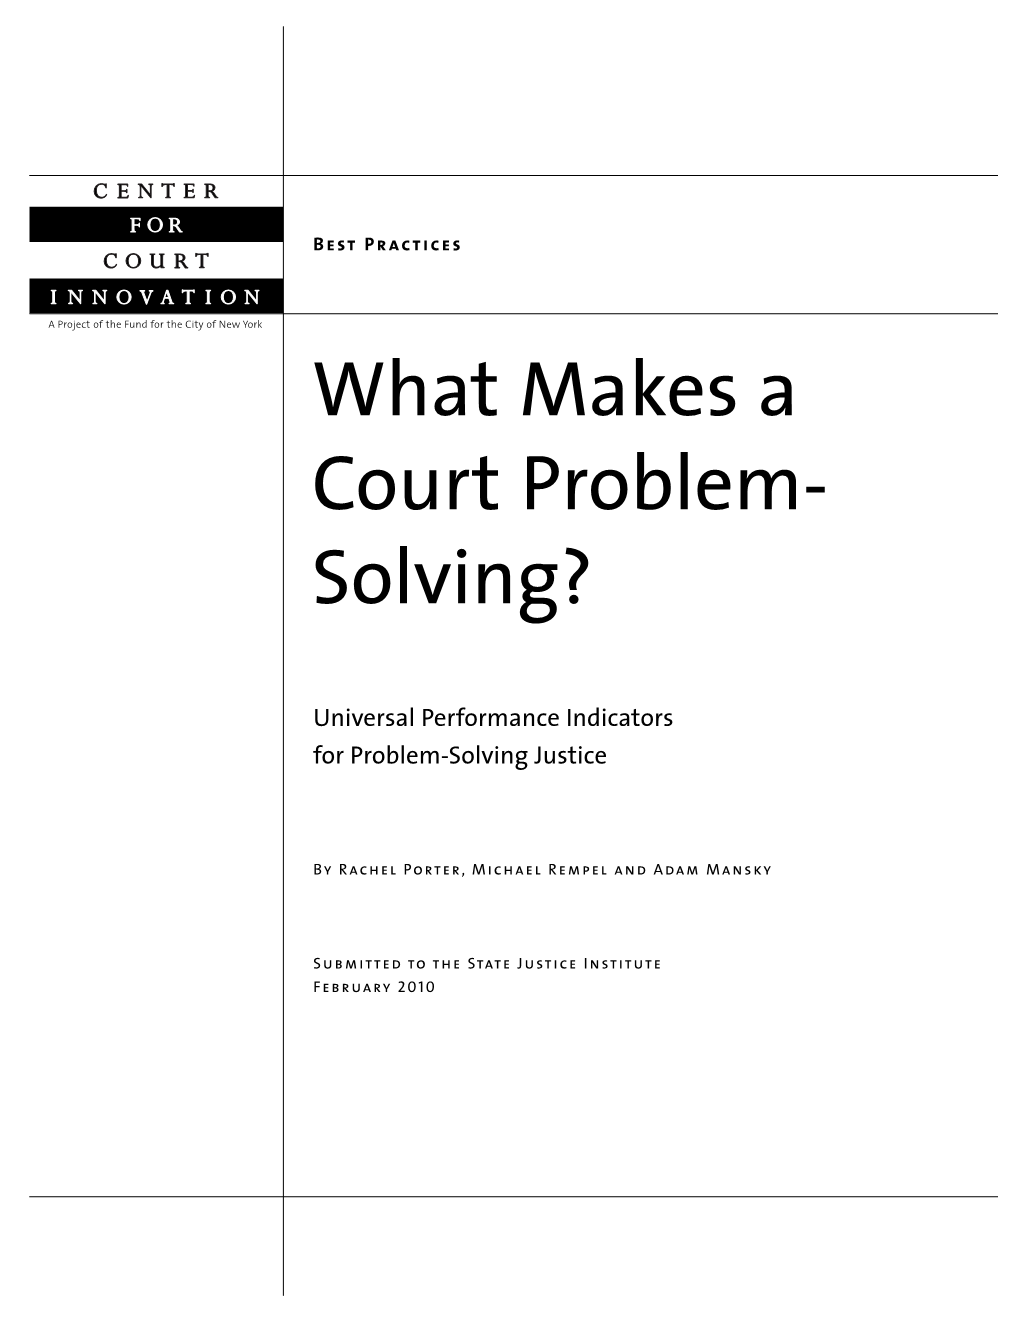 What Makes a Court Problem- Solving?